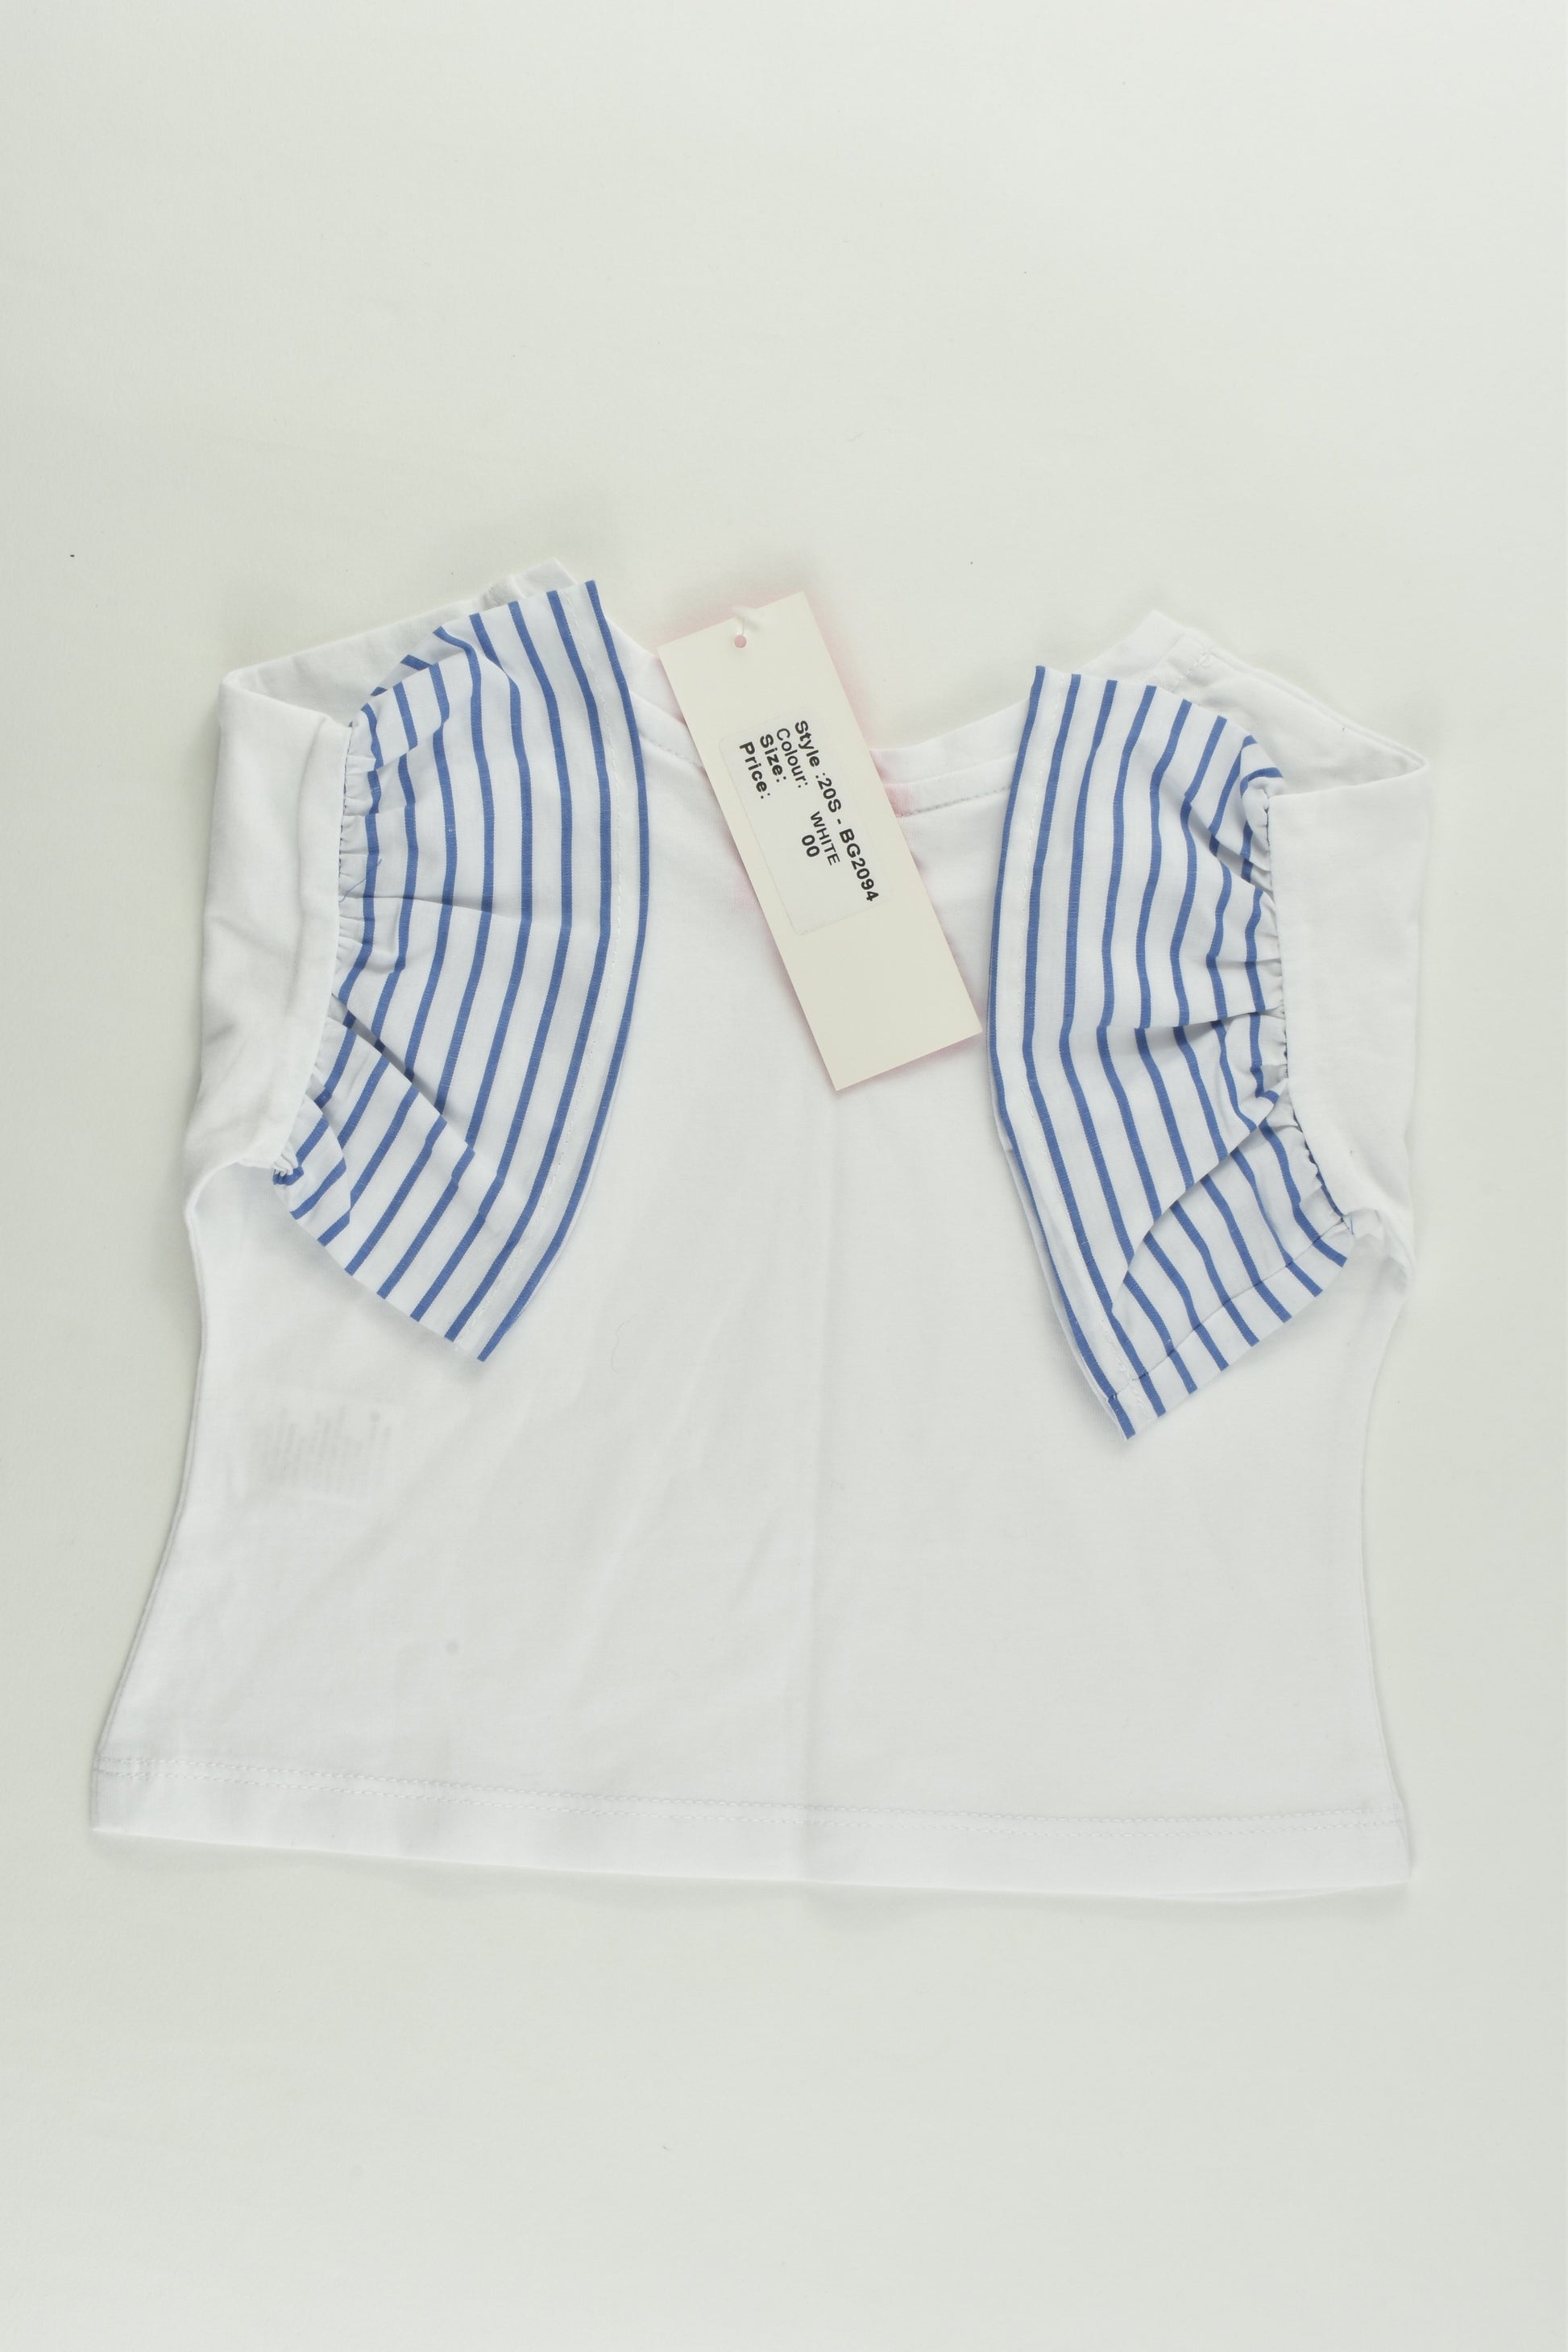 NEW Cinnamon Girl Size 00 Striped Sleeves T-shirt